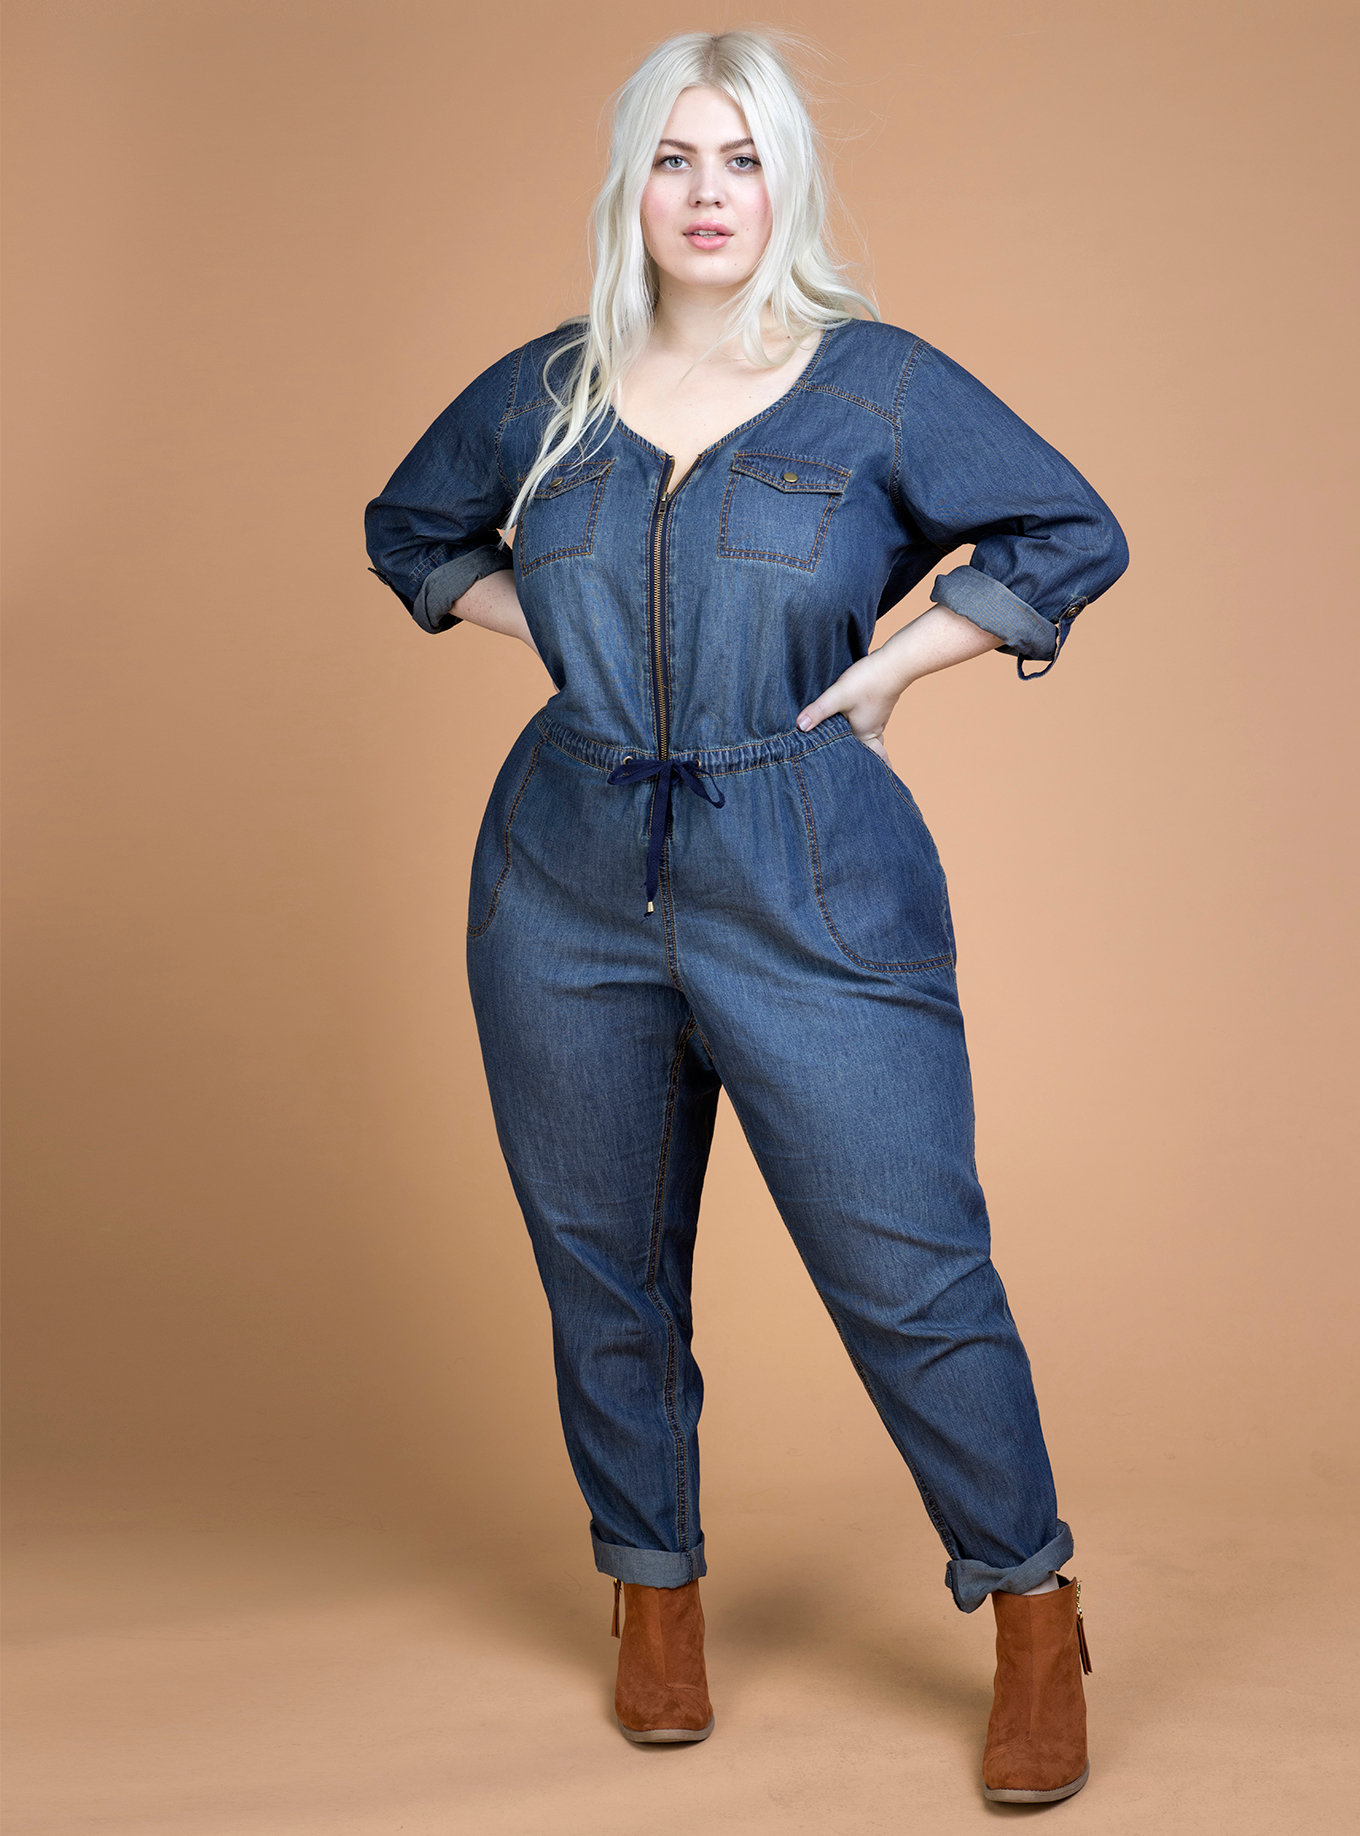 You Should Know: 10 Bomb Plus Size Brands We Love! – Fashion Bomb Daily